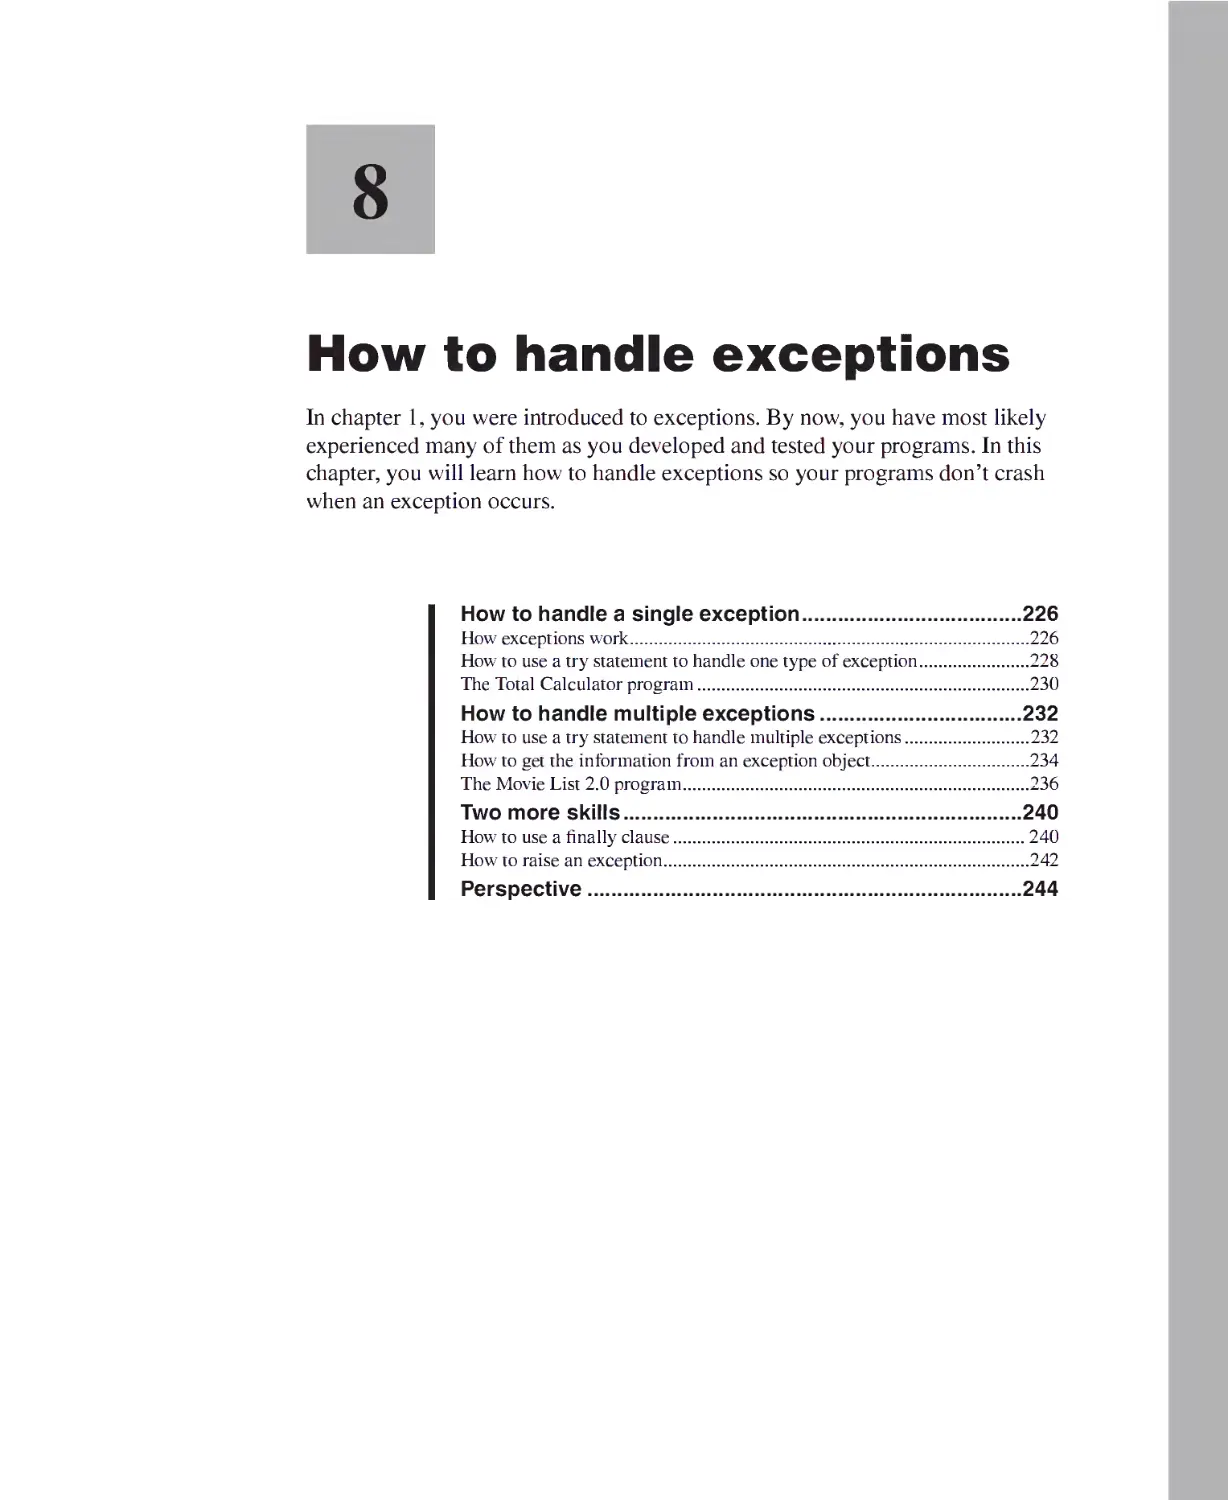 Chapter 8 - How to Handle Exceptions